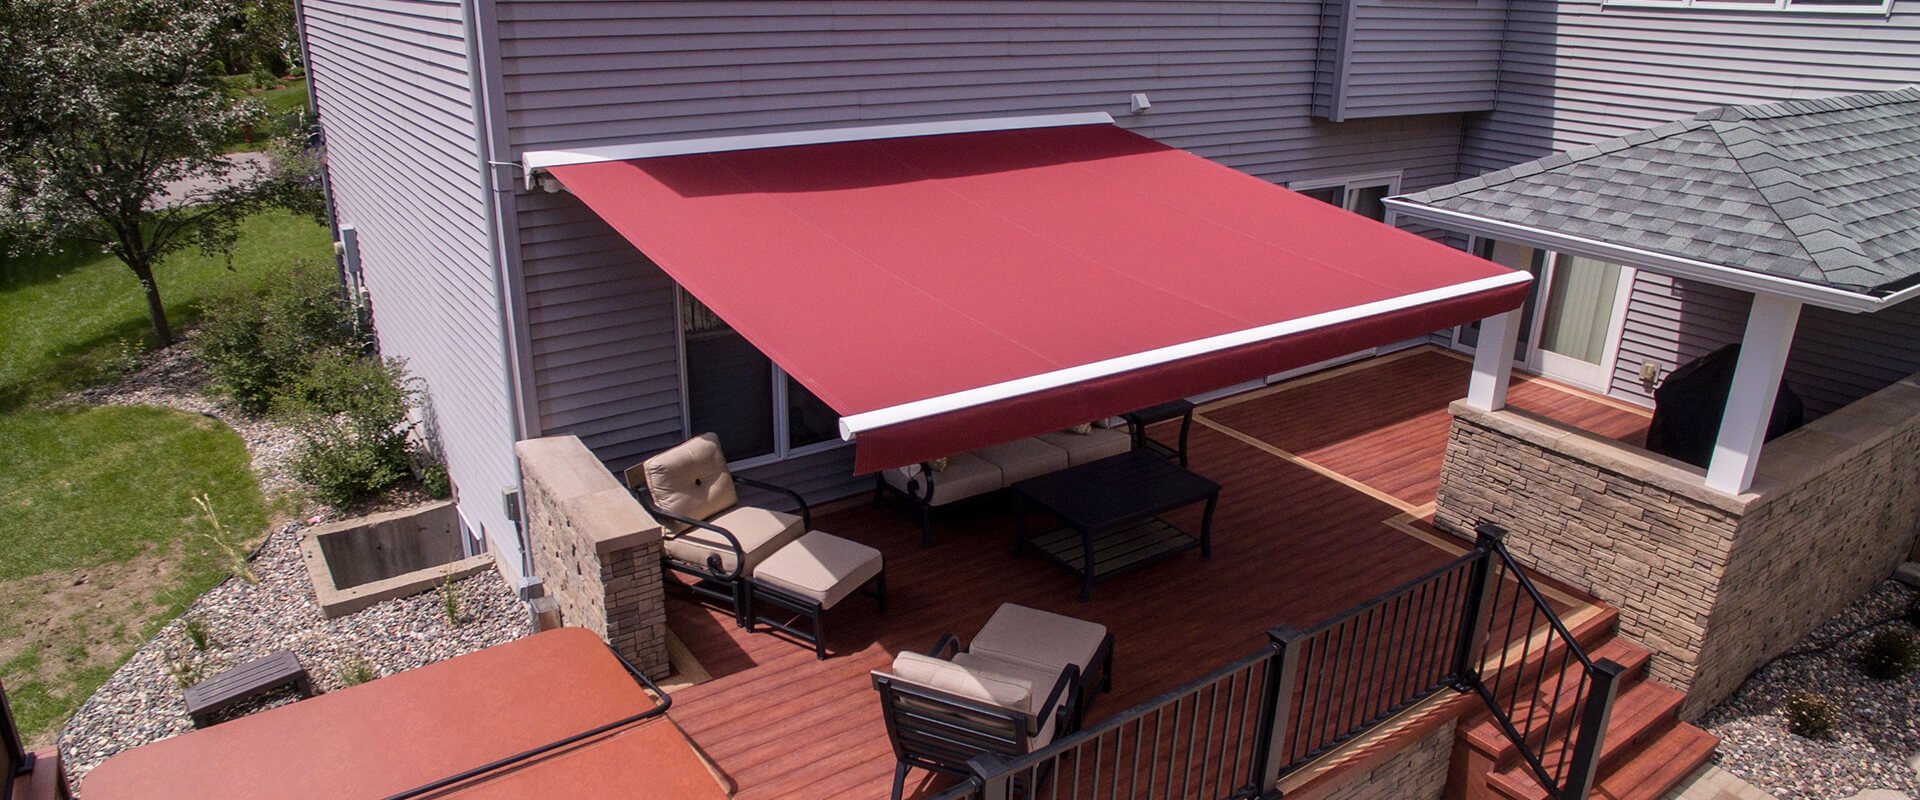 Qualities To Look For In Your Retractable Awning’s Fabric